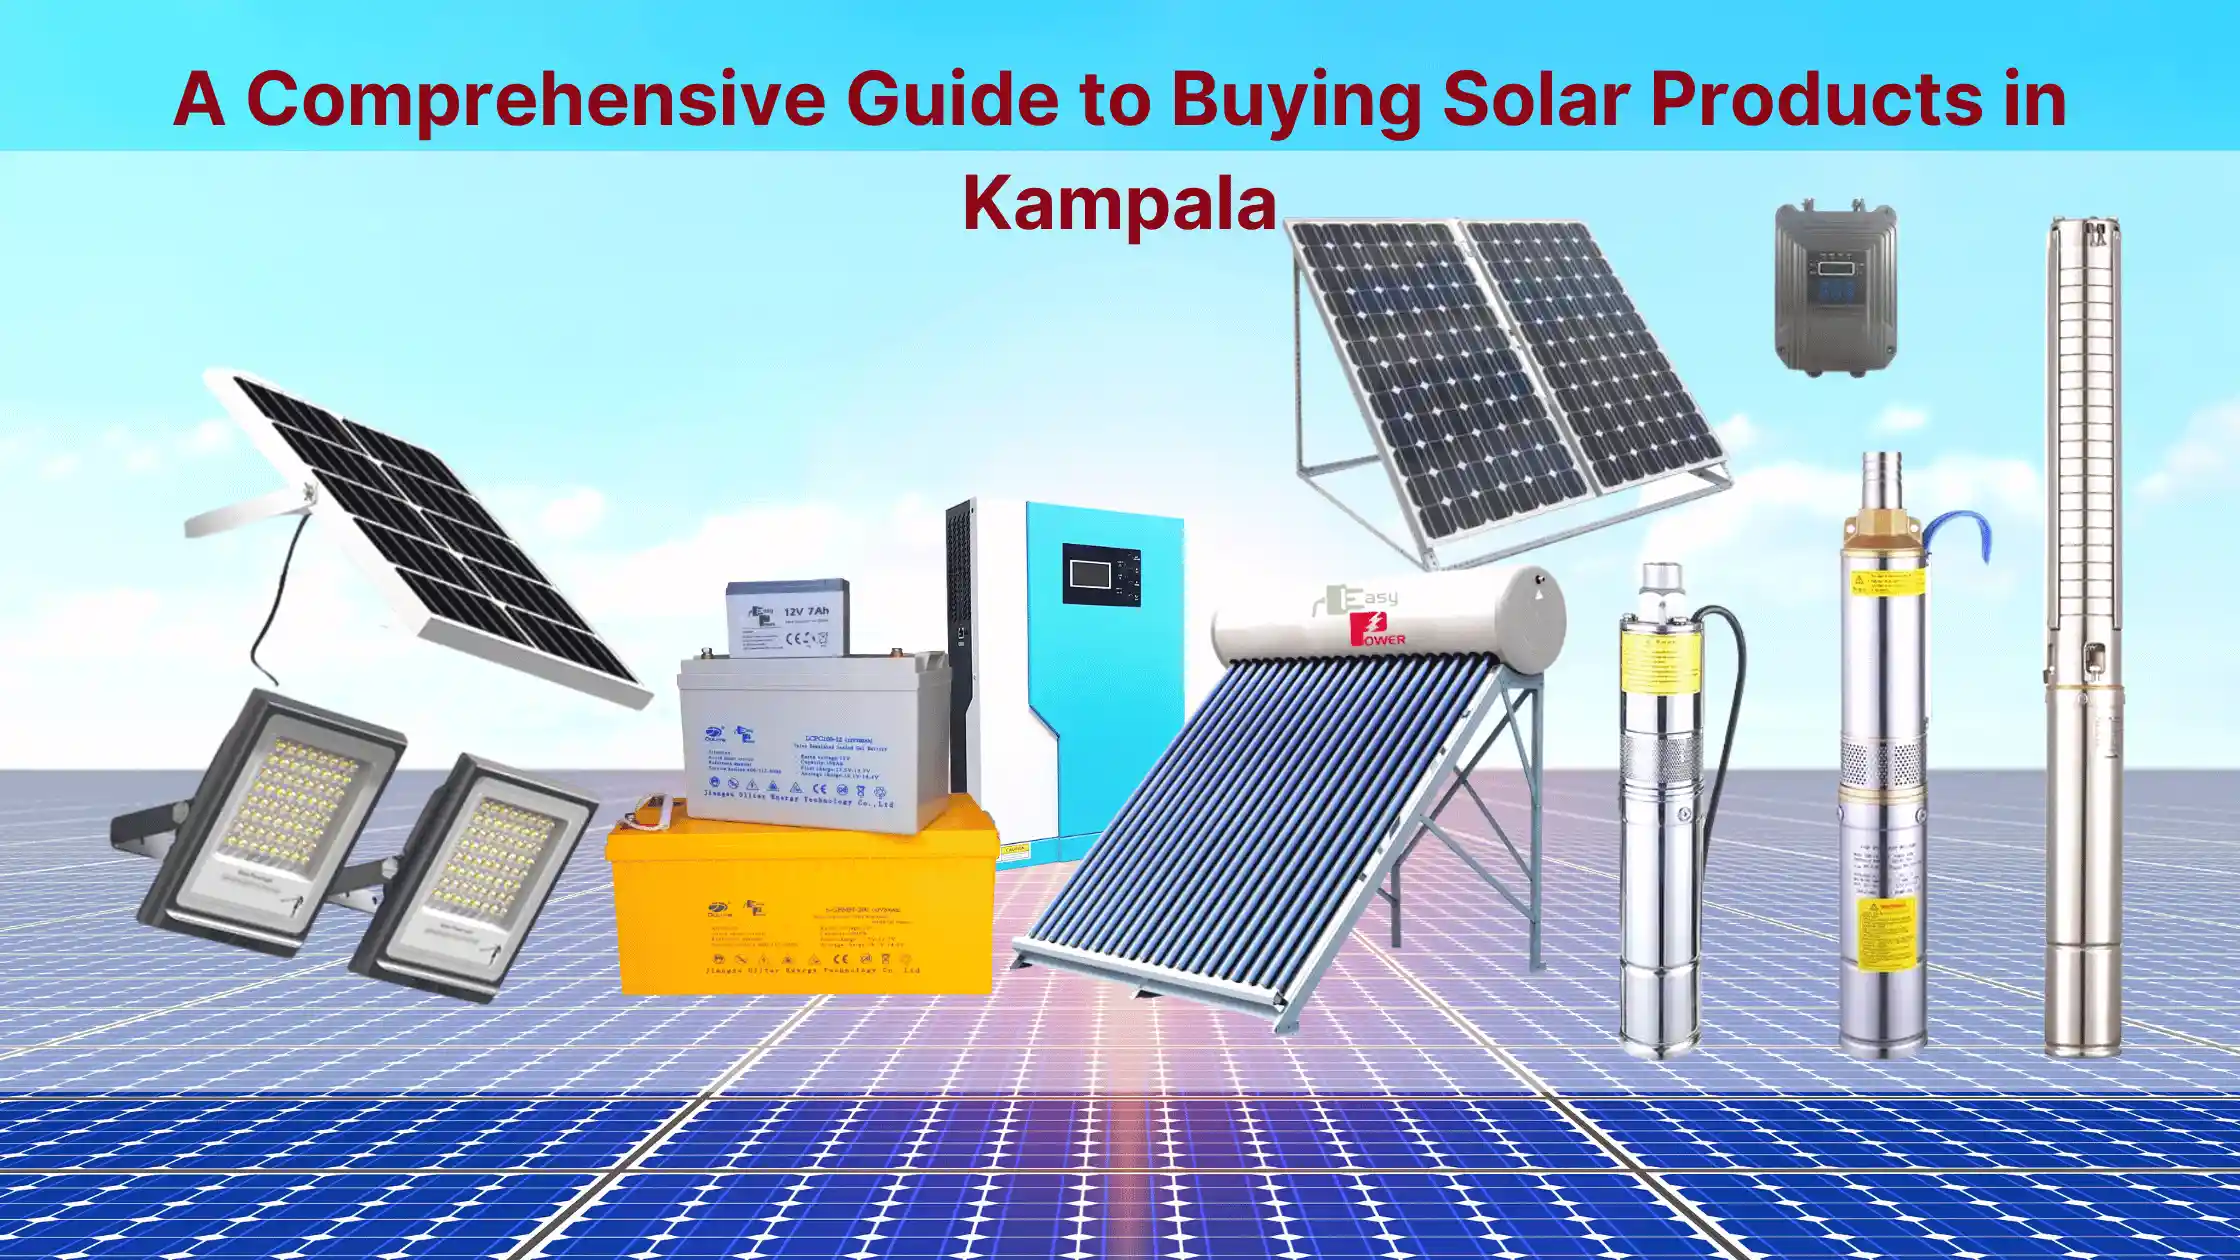 Solar products in Kampala